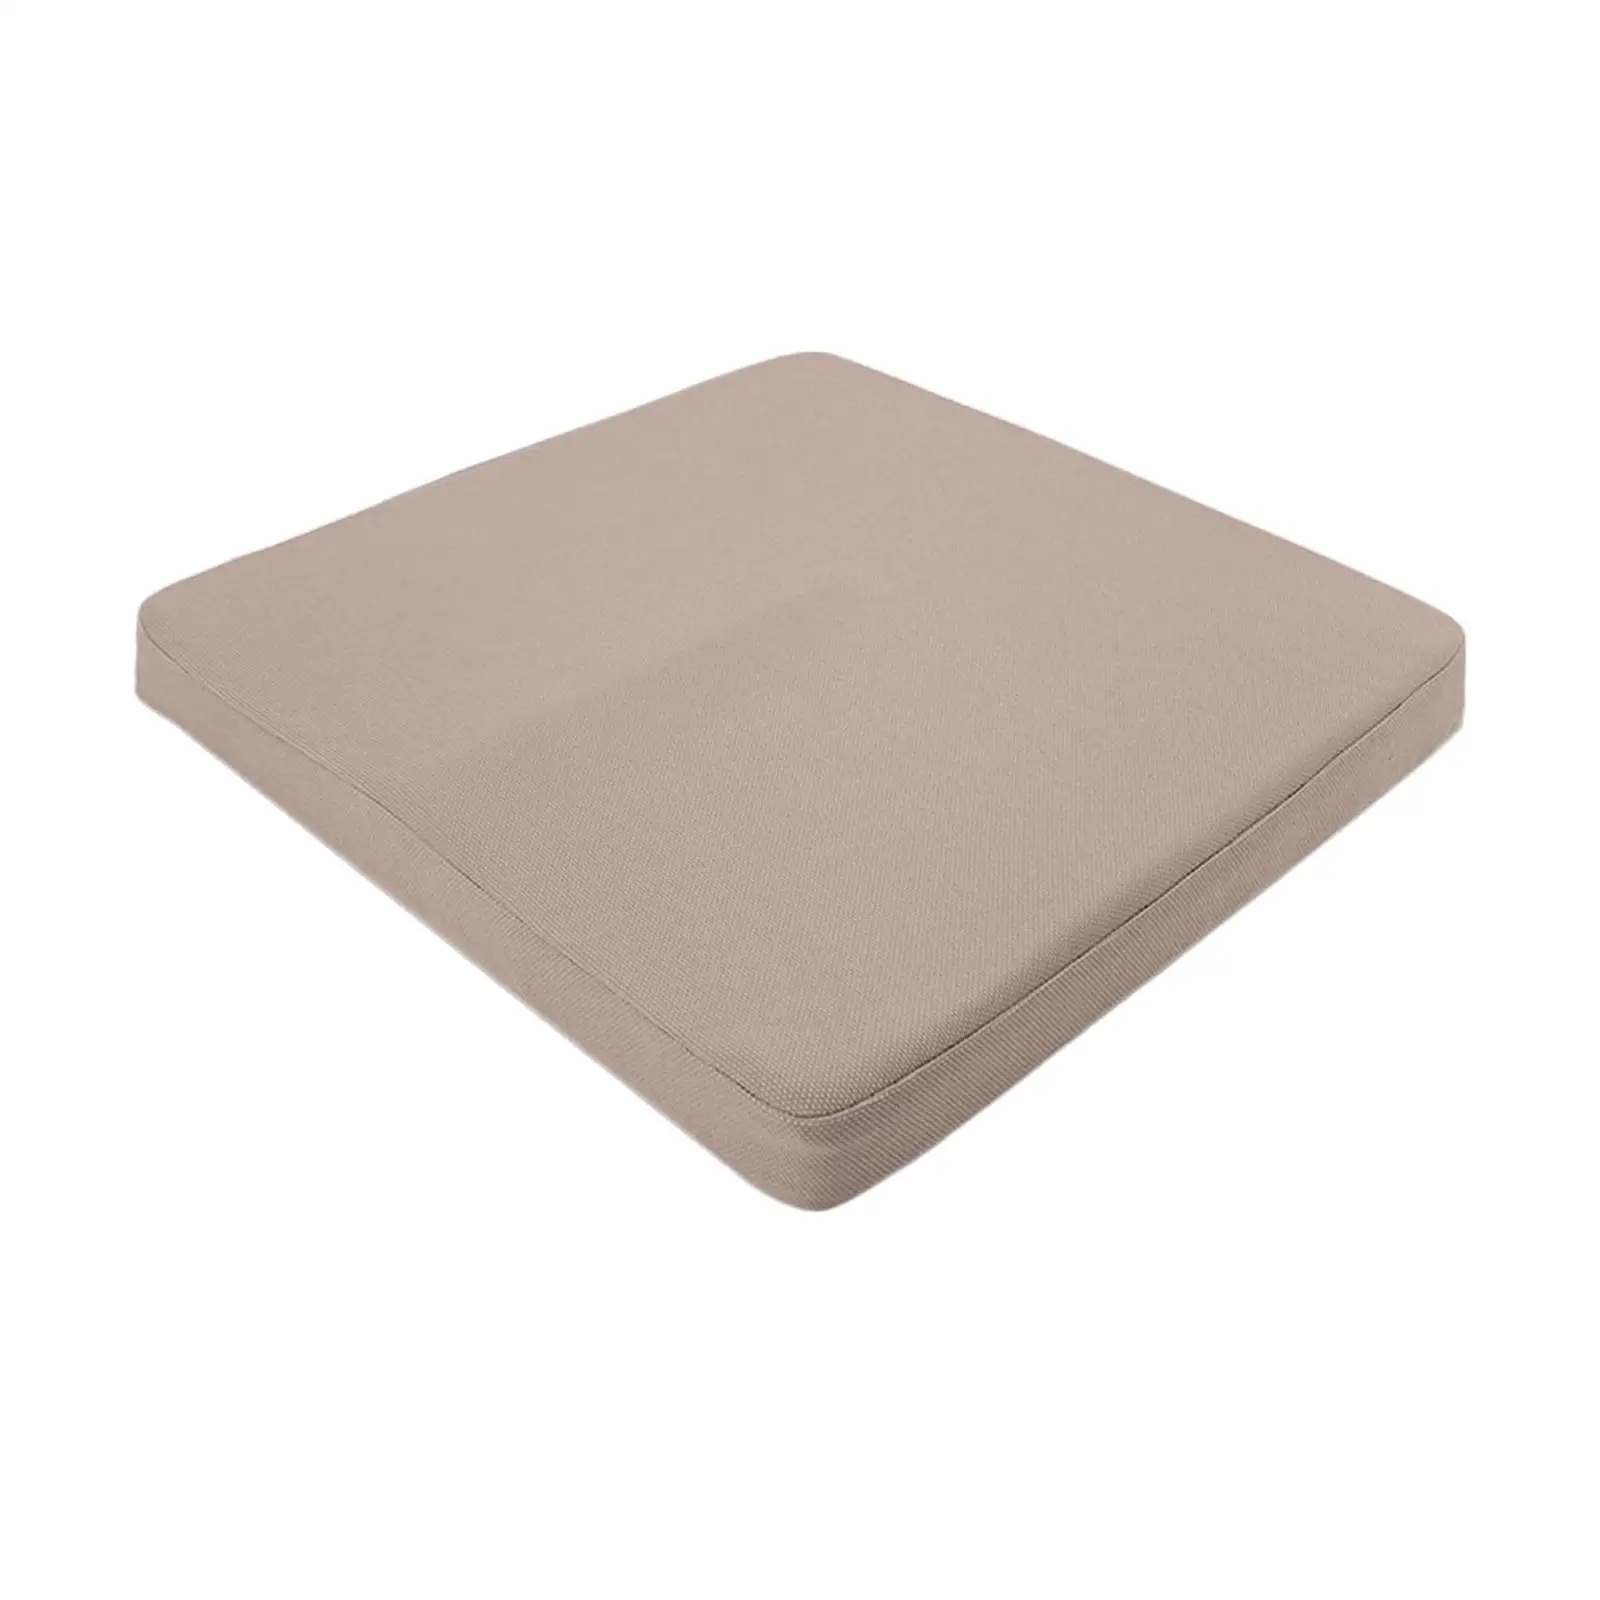 Sitting Pad Washable Cover Nonslip Back Ergonomic Support Comfortable Soft Seat Cushion for Office Home Kitchen Dining Chair